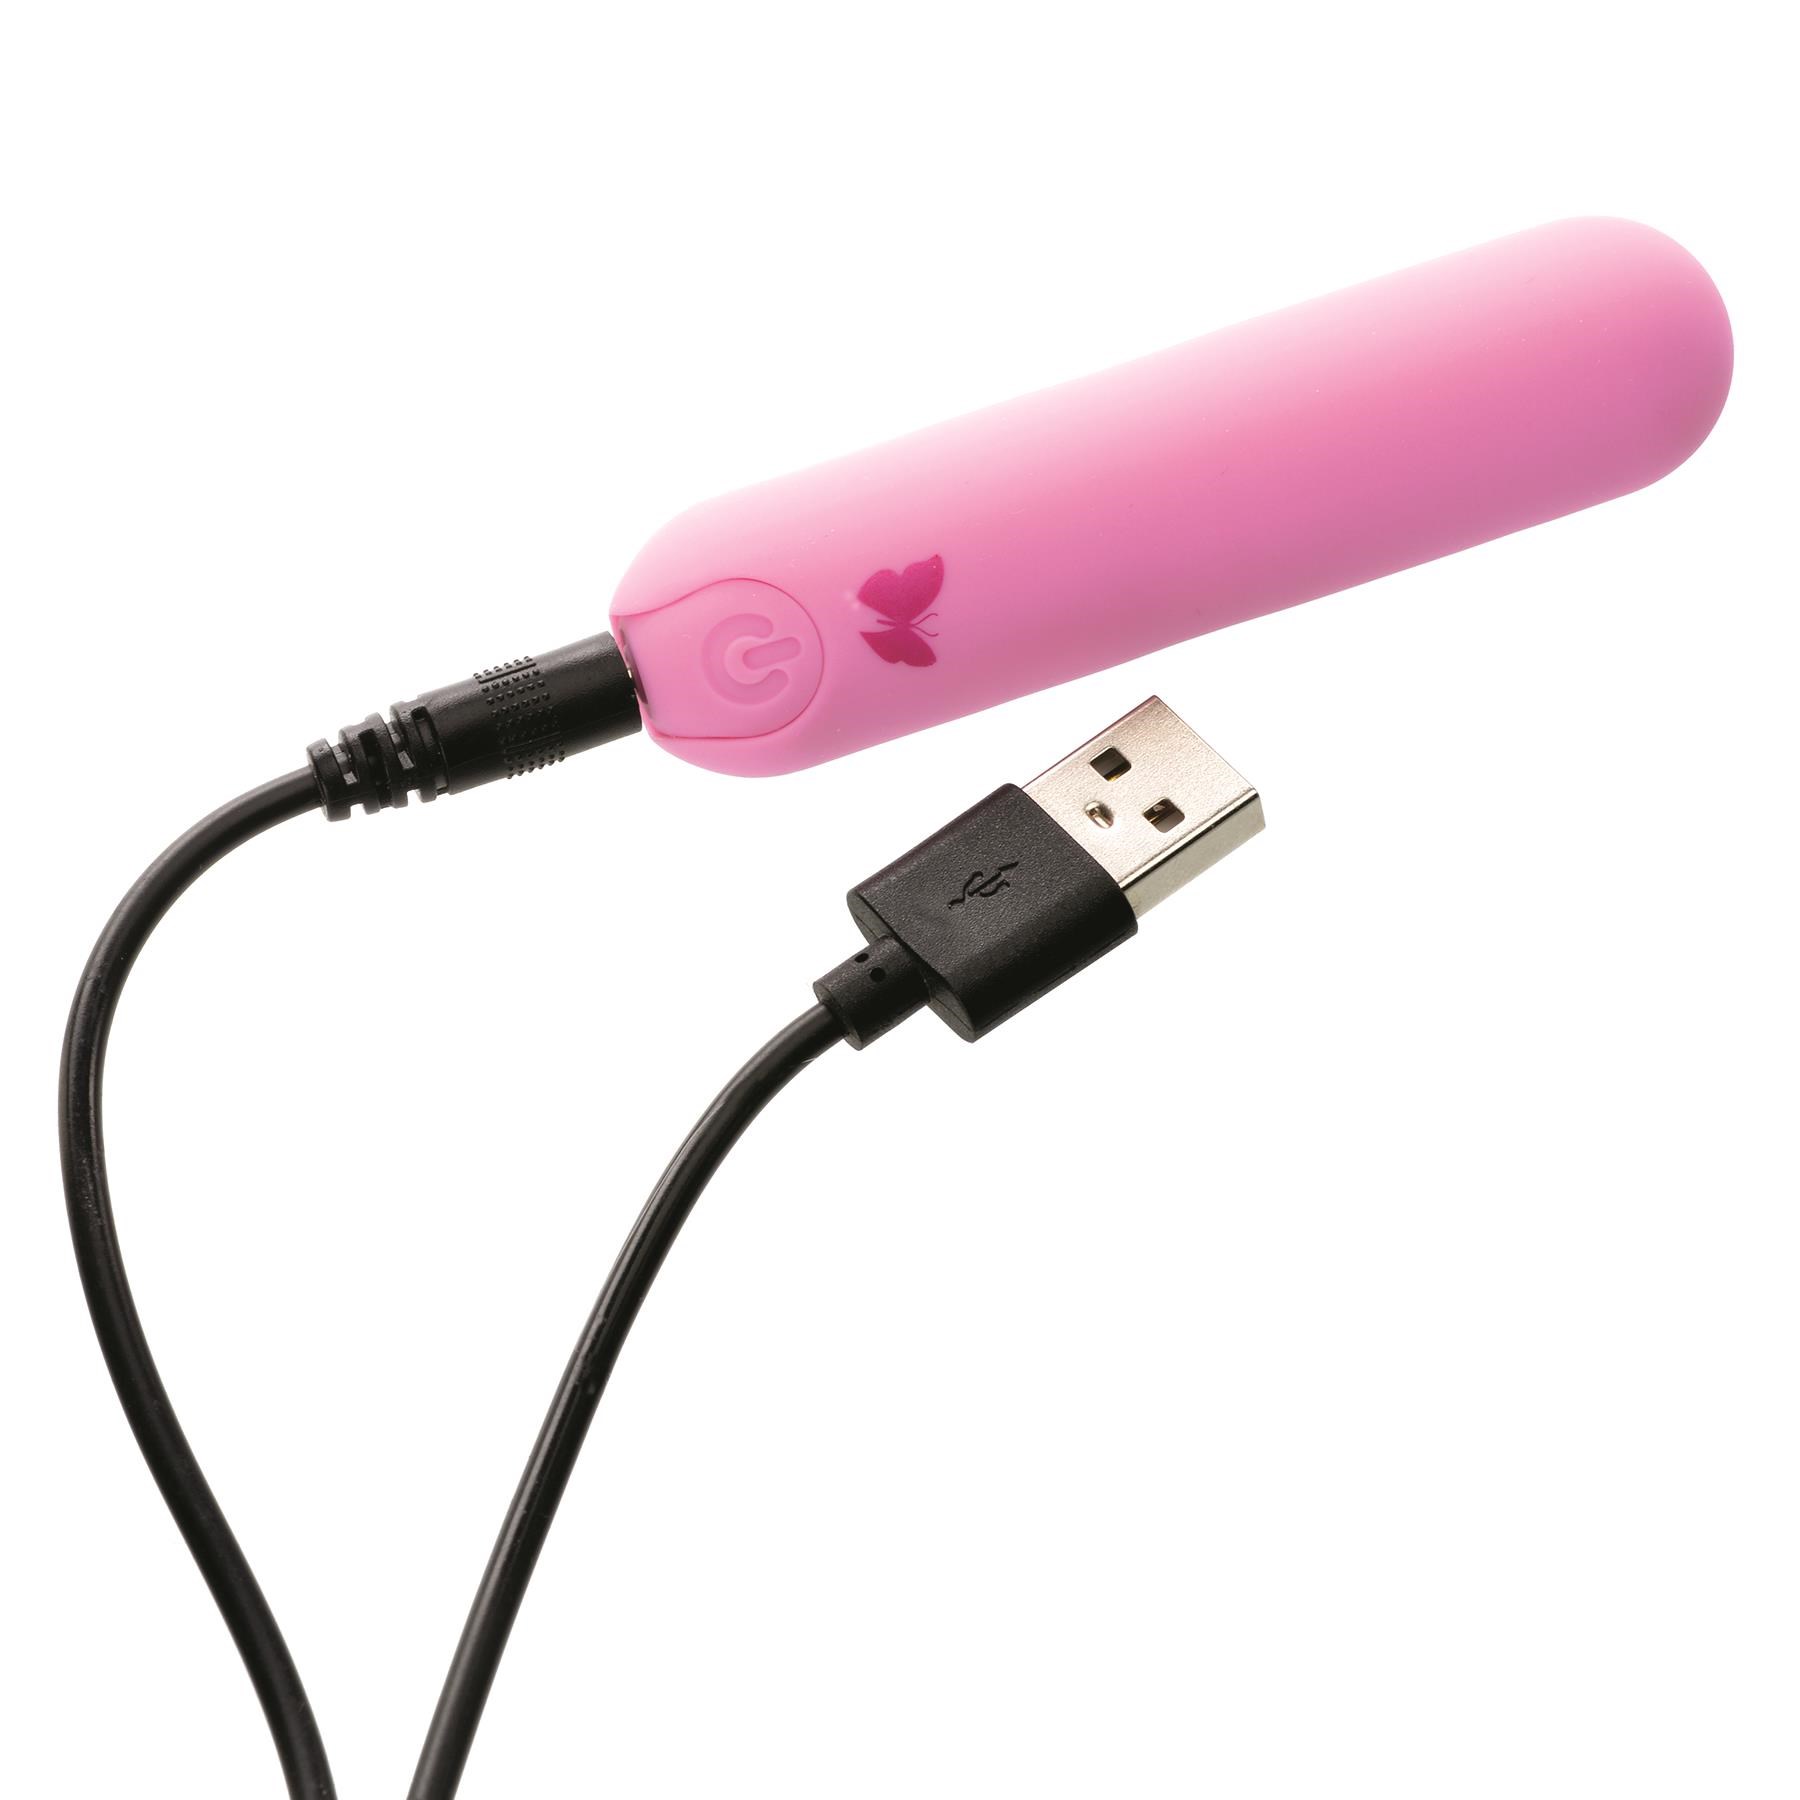 Wild Secrets Kiss Rechargeable Bullet - Showing Where Charging Cable is Placed